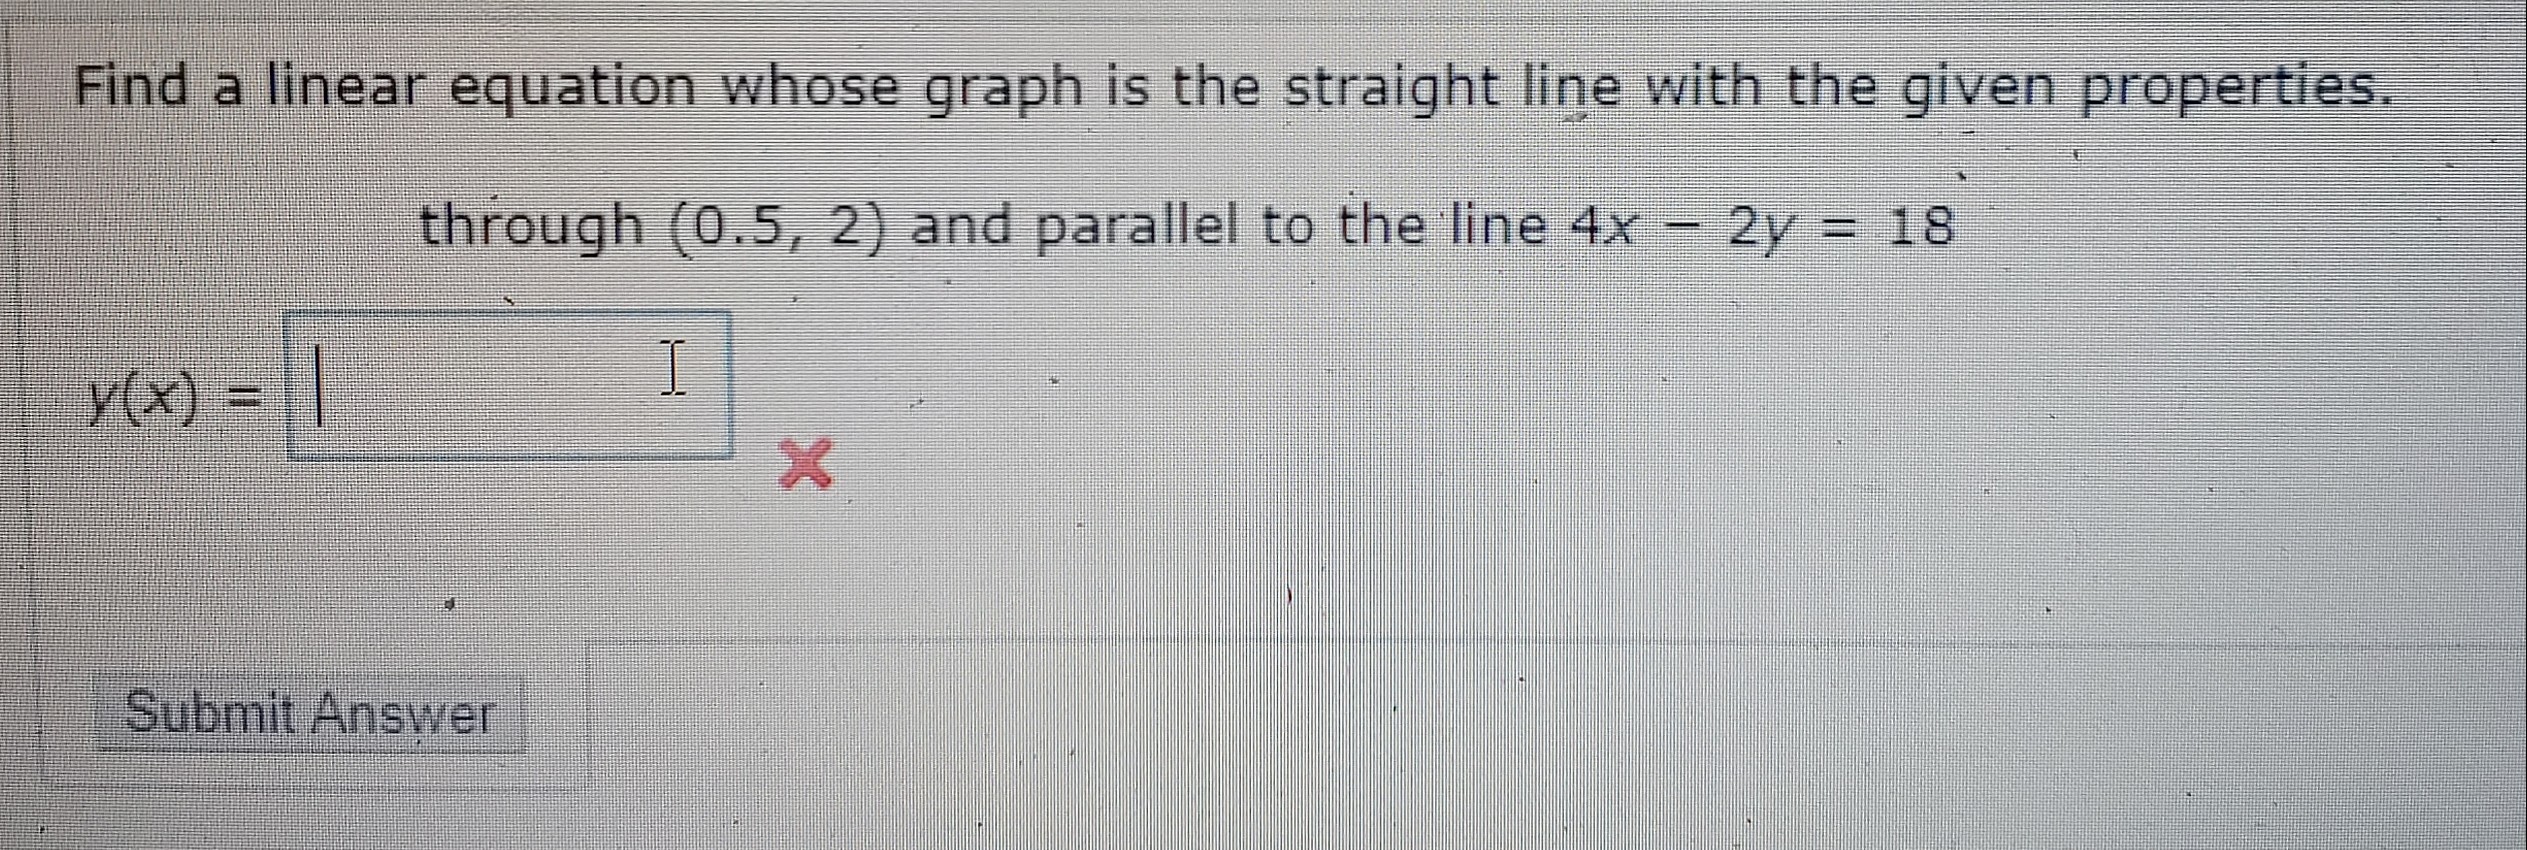 Find a linear equation whose graph is the straight line with the given properties.
through (0.5, 2) and parallel to the line 4x - 2y = 18
